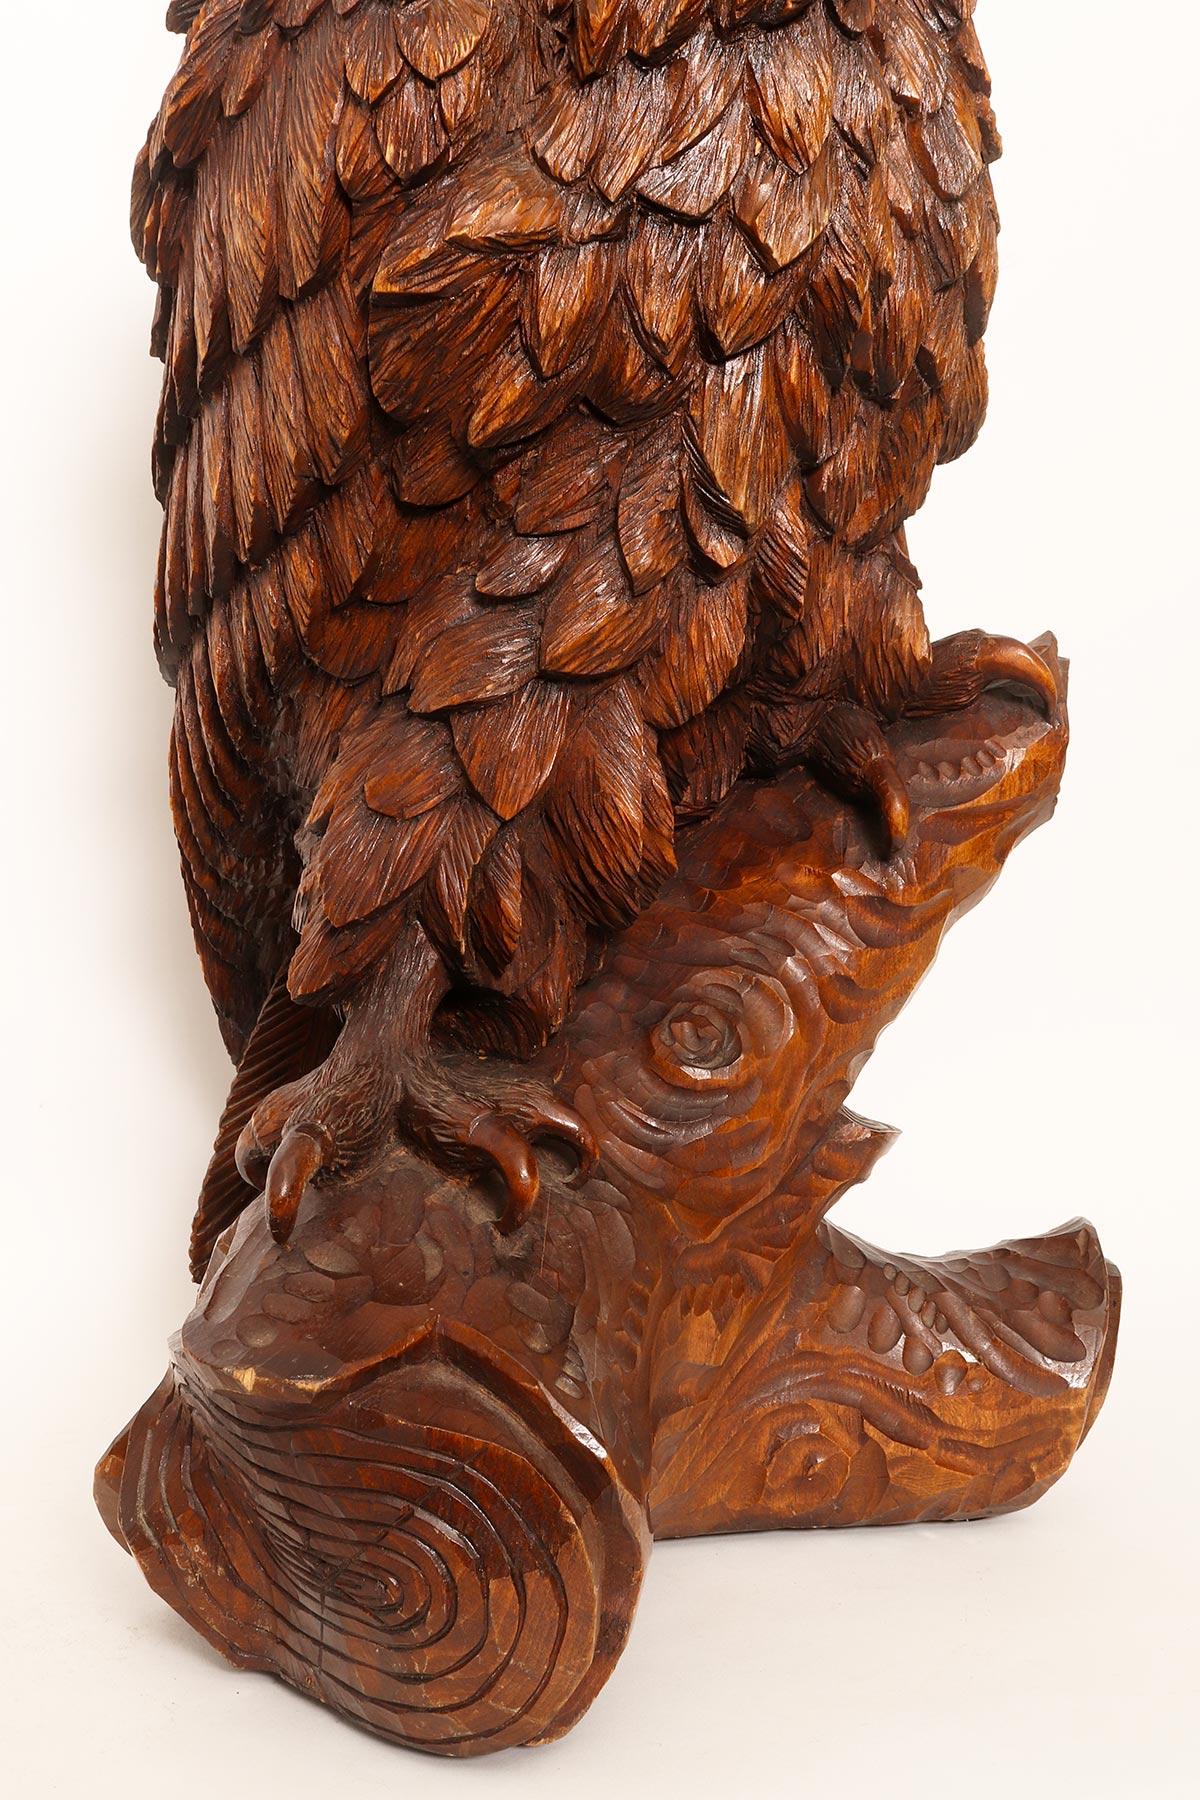 Large Carved Sculpture Depicting an Owl, Brienz, 1880 3